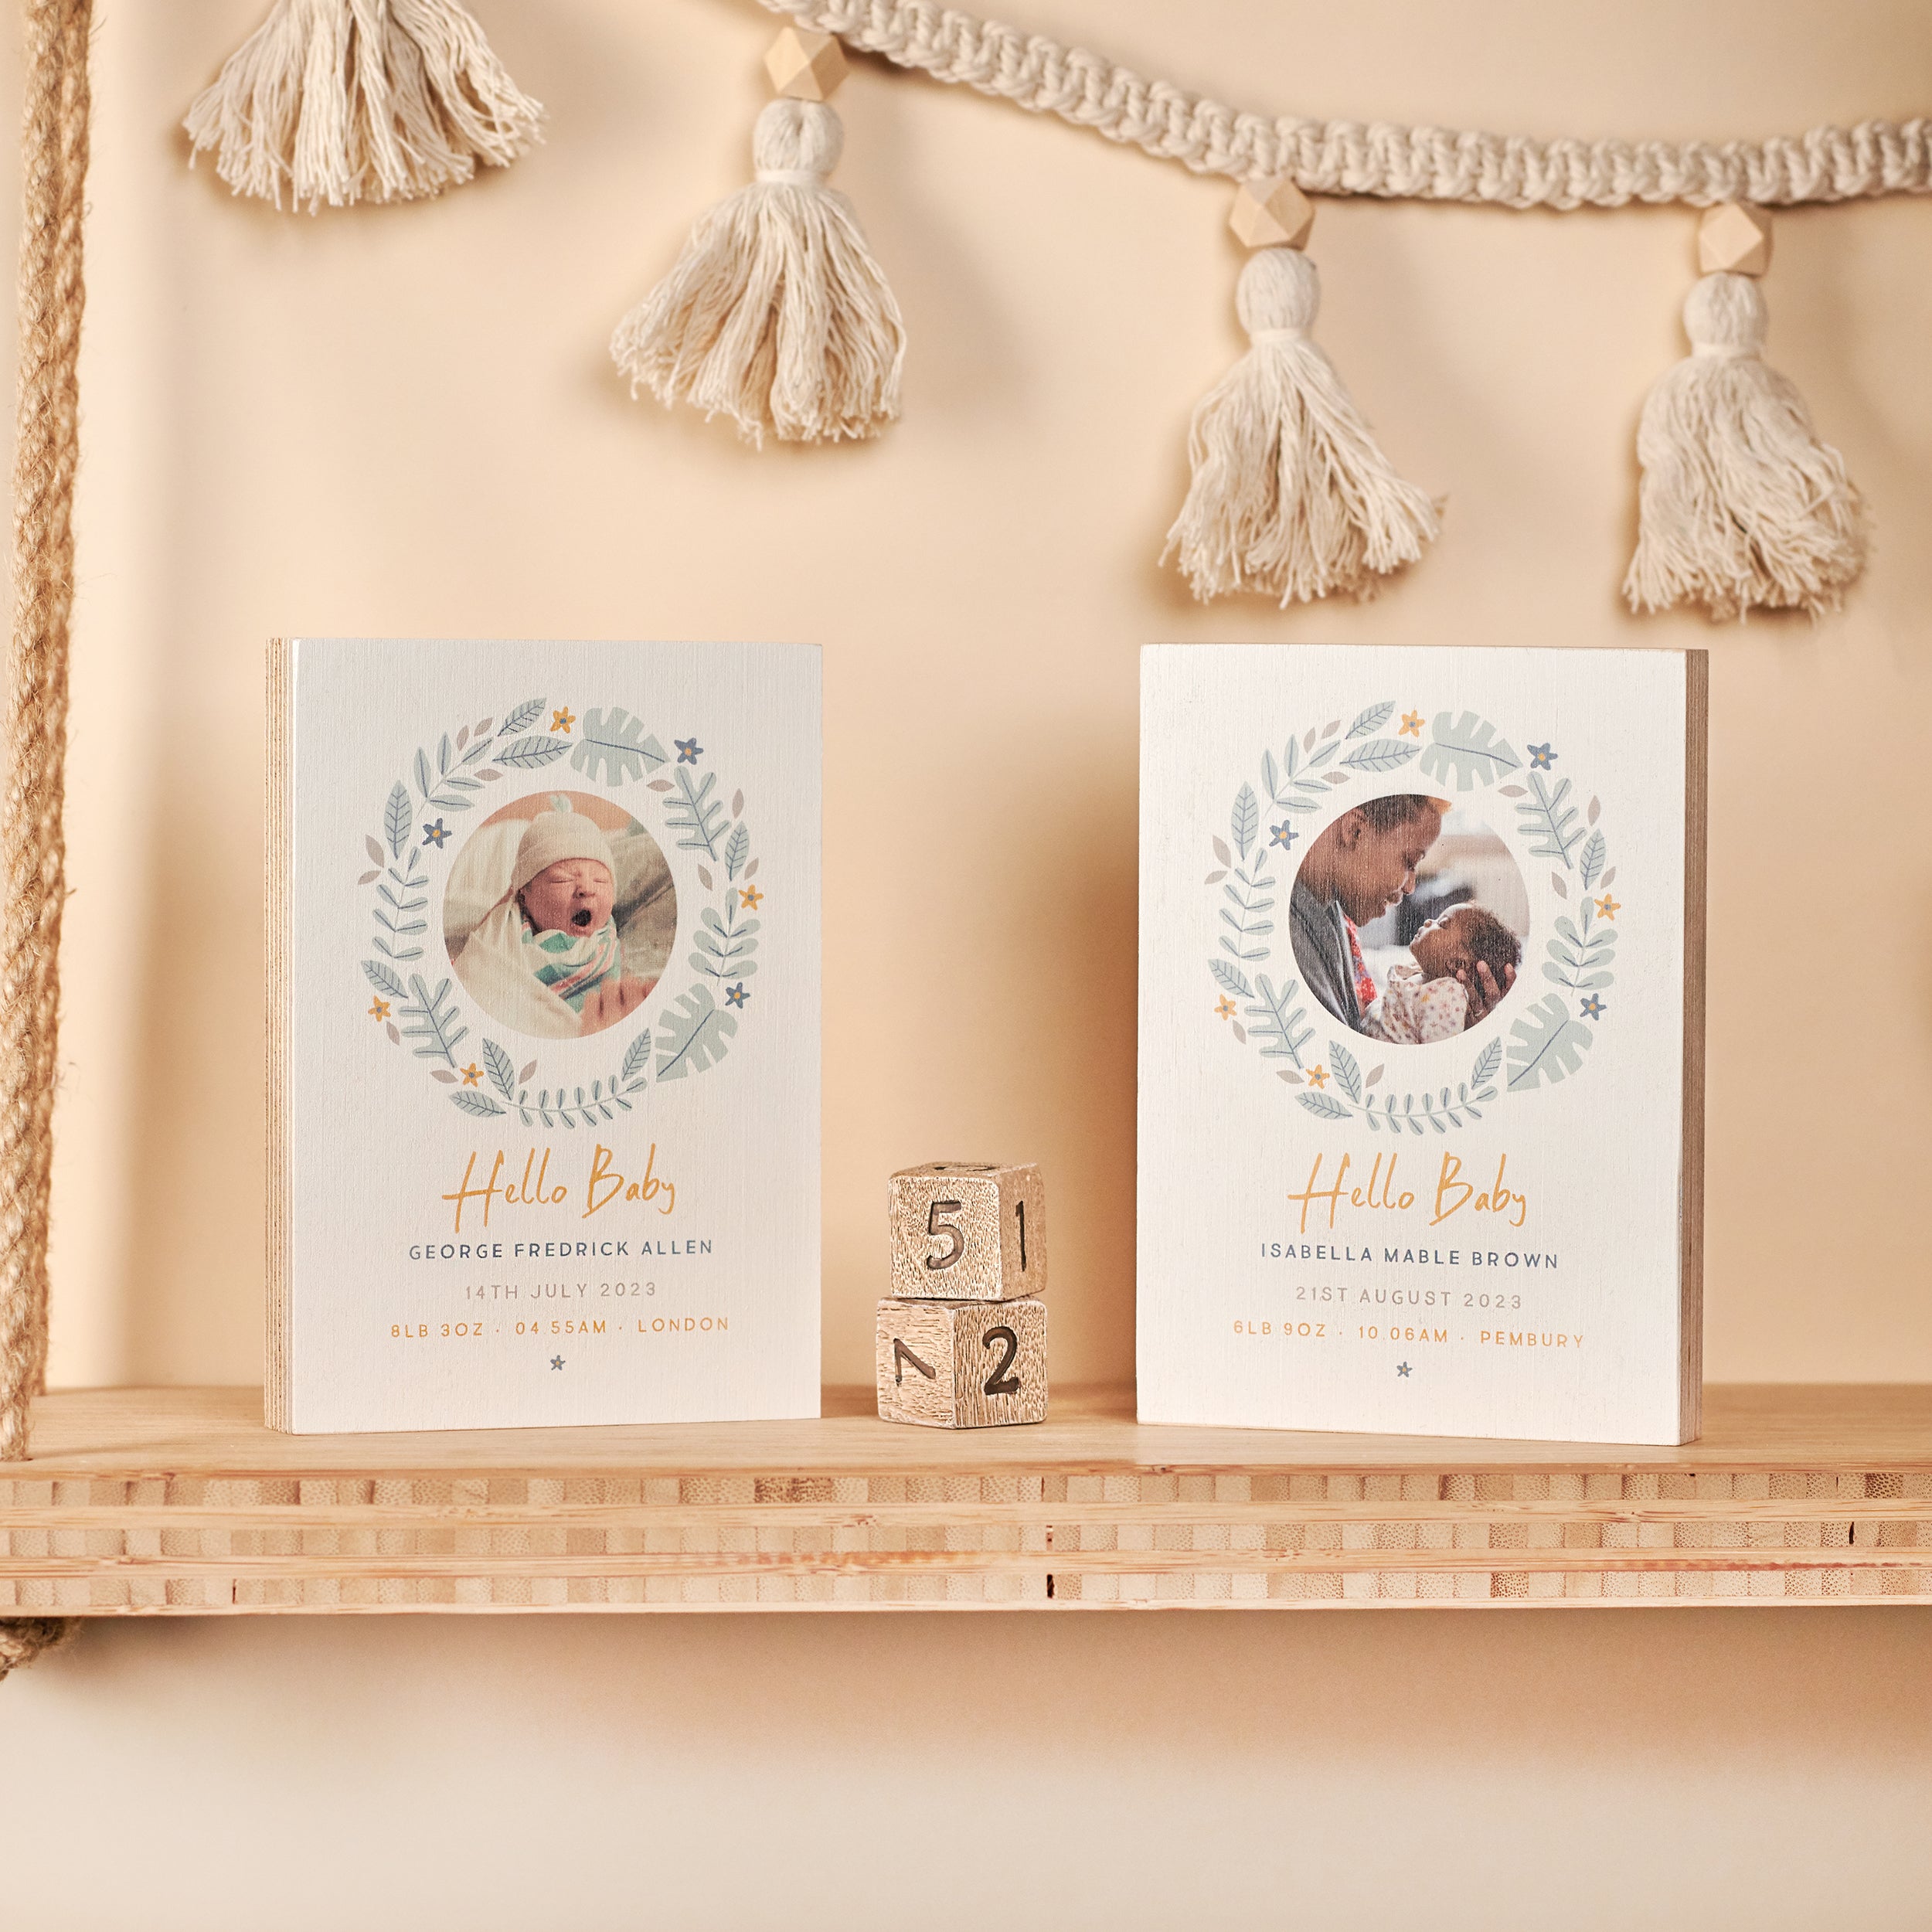 Oakdene Designs Photo Products Personalised 'New Baby' Photo Birch Block